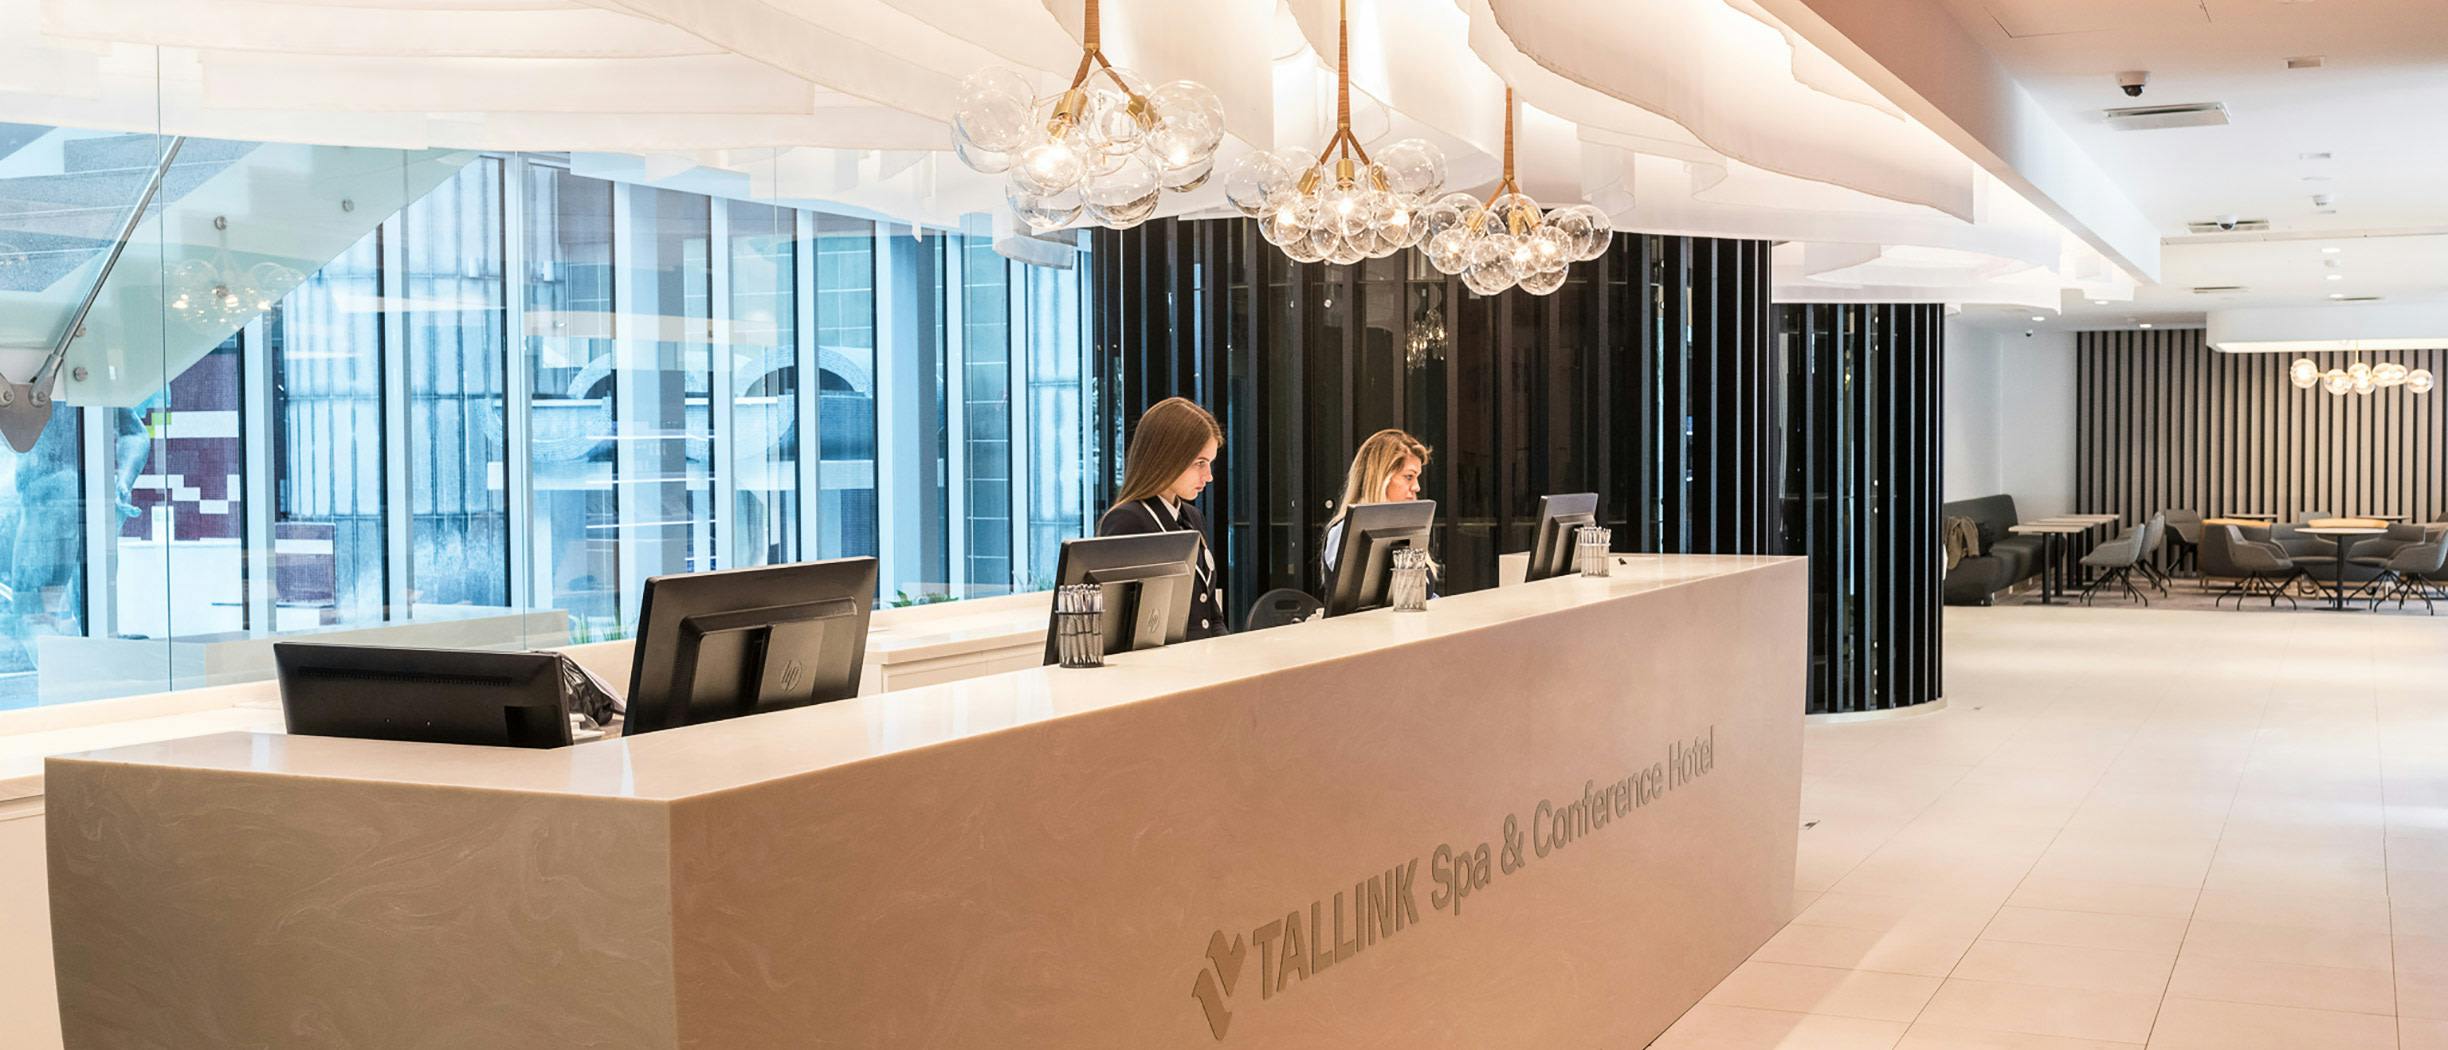 Tallink Spa & Conference Hotel